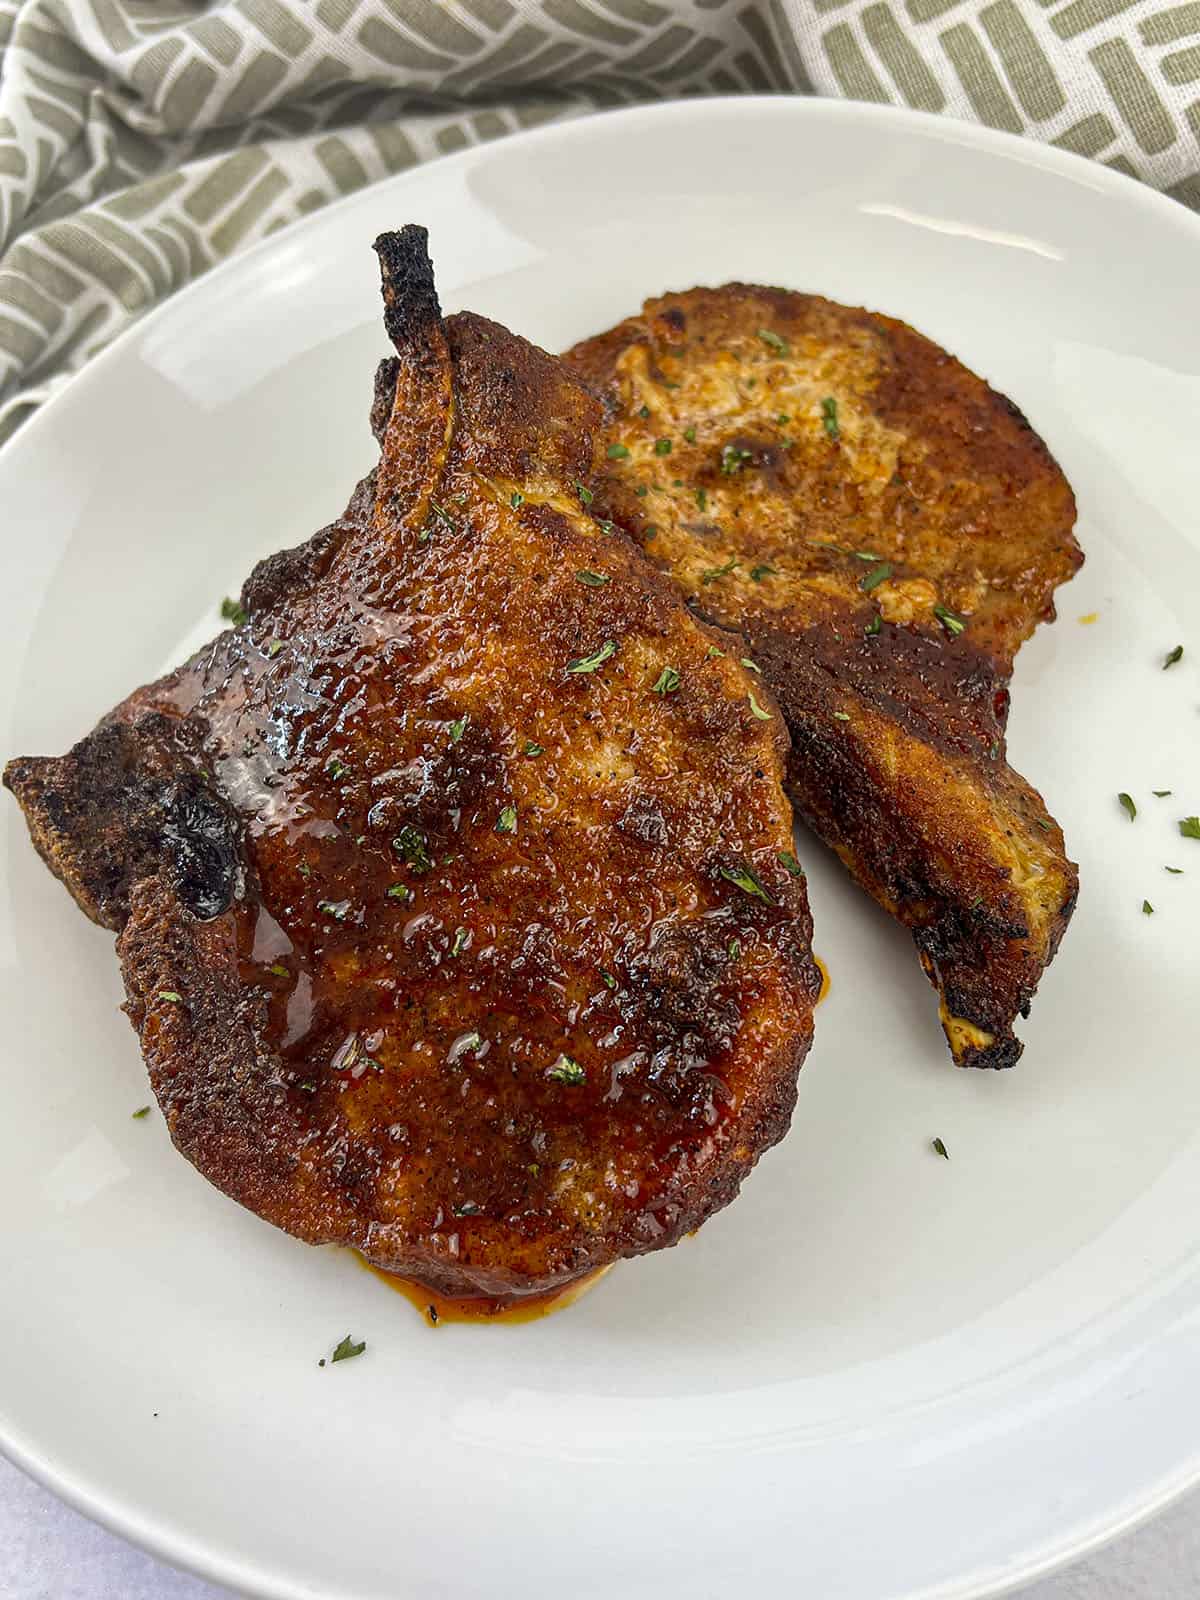 Two pork chops that are seasoned and air fried sitting on a white plate with a napkin in the background.